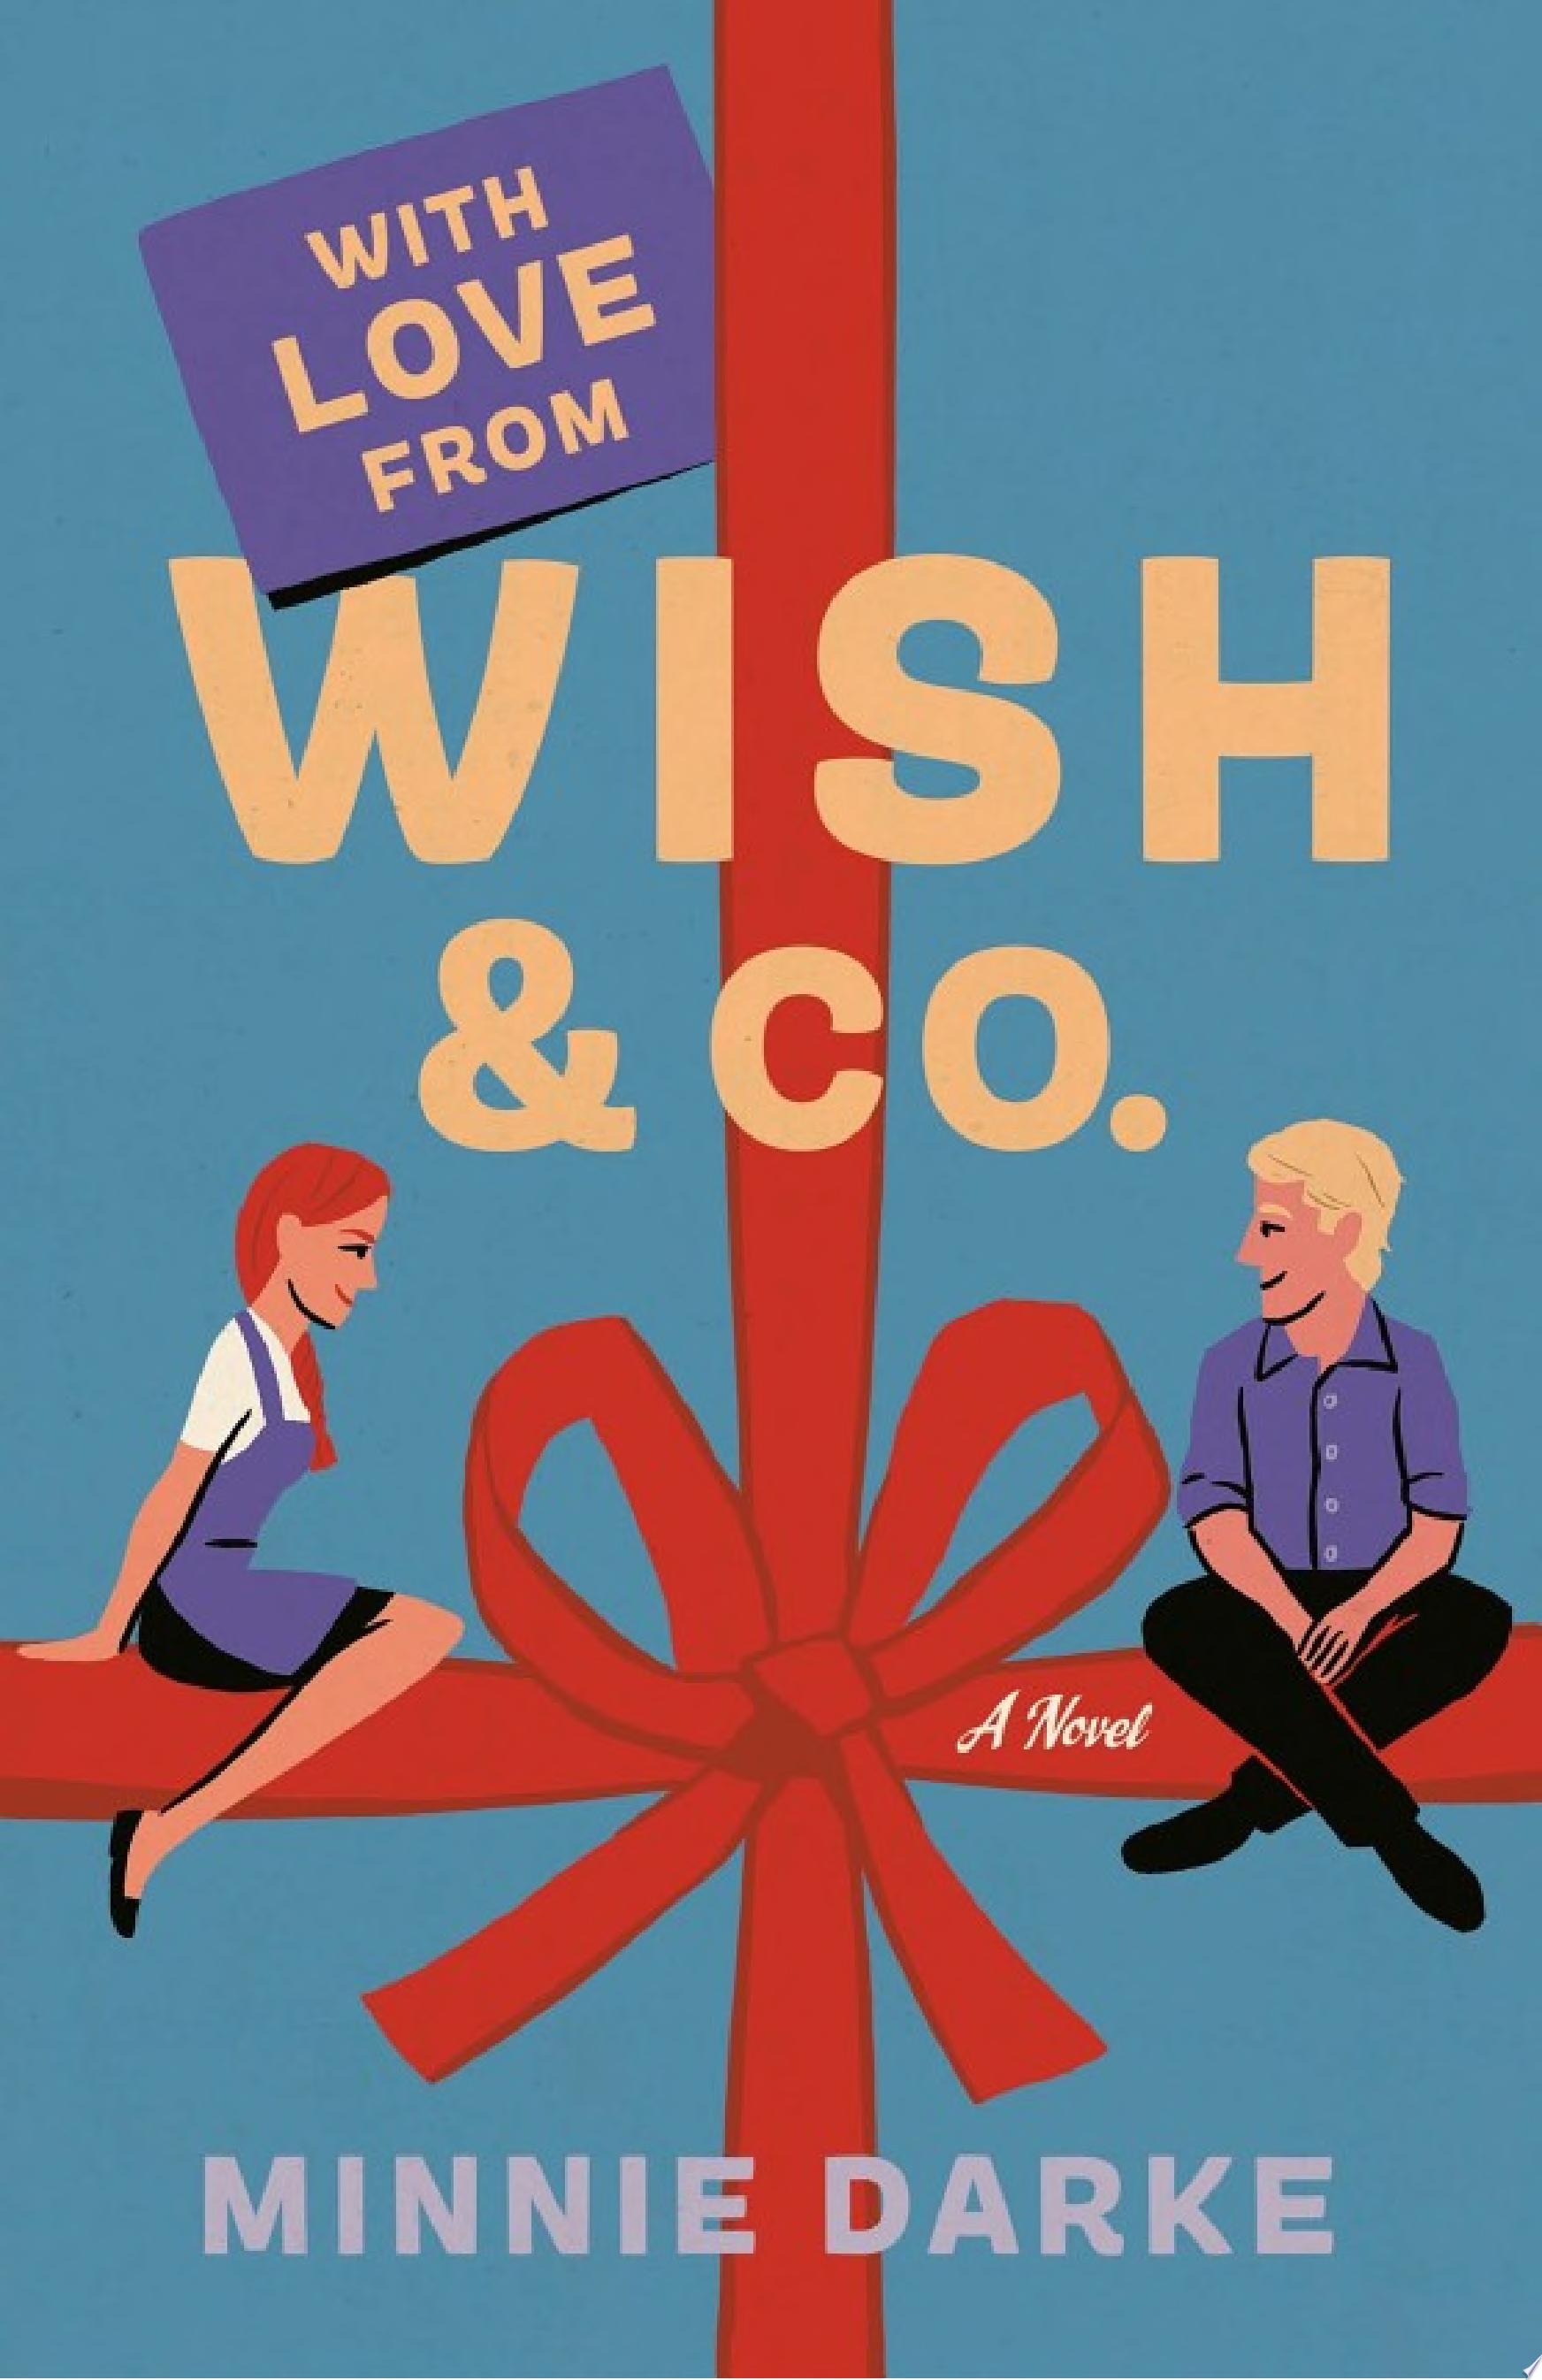 Image for "With Love from Wish & Co."